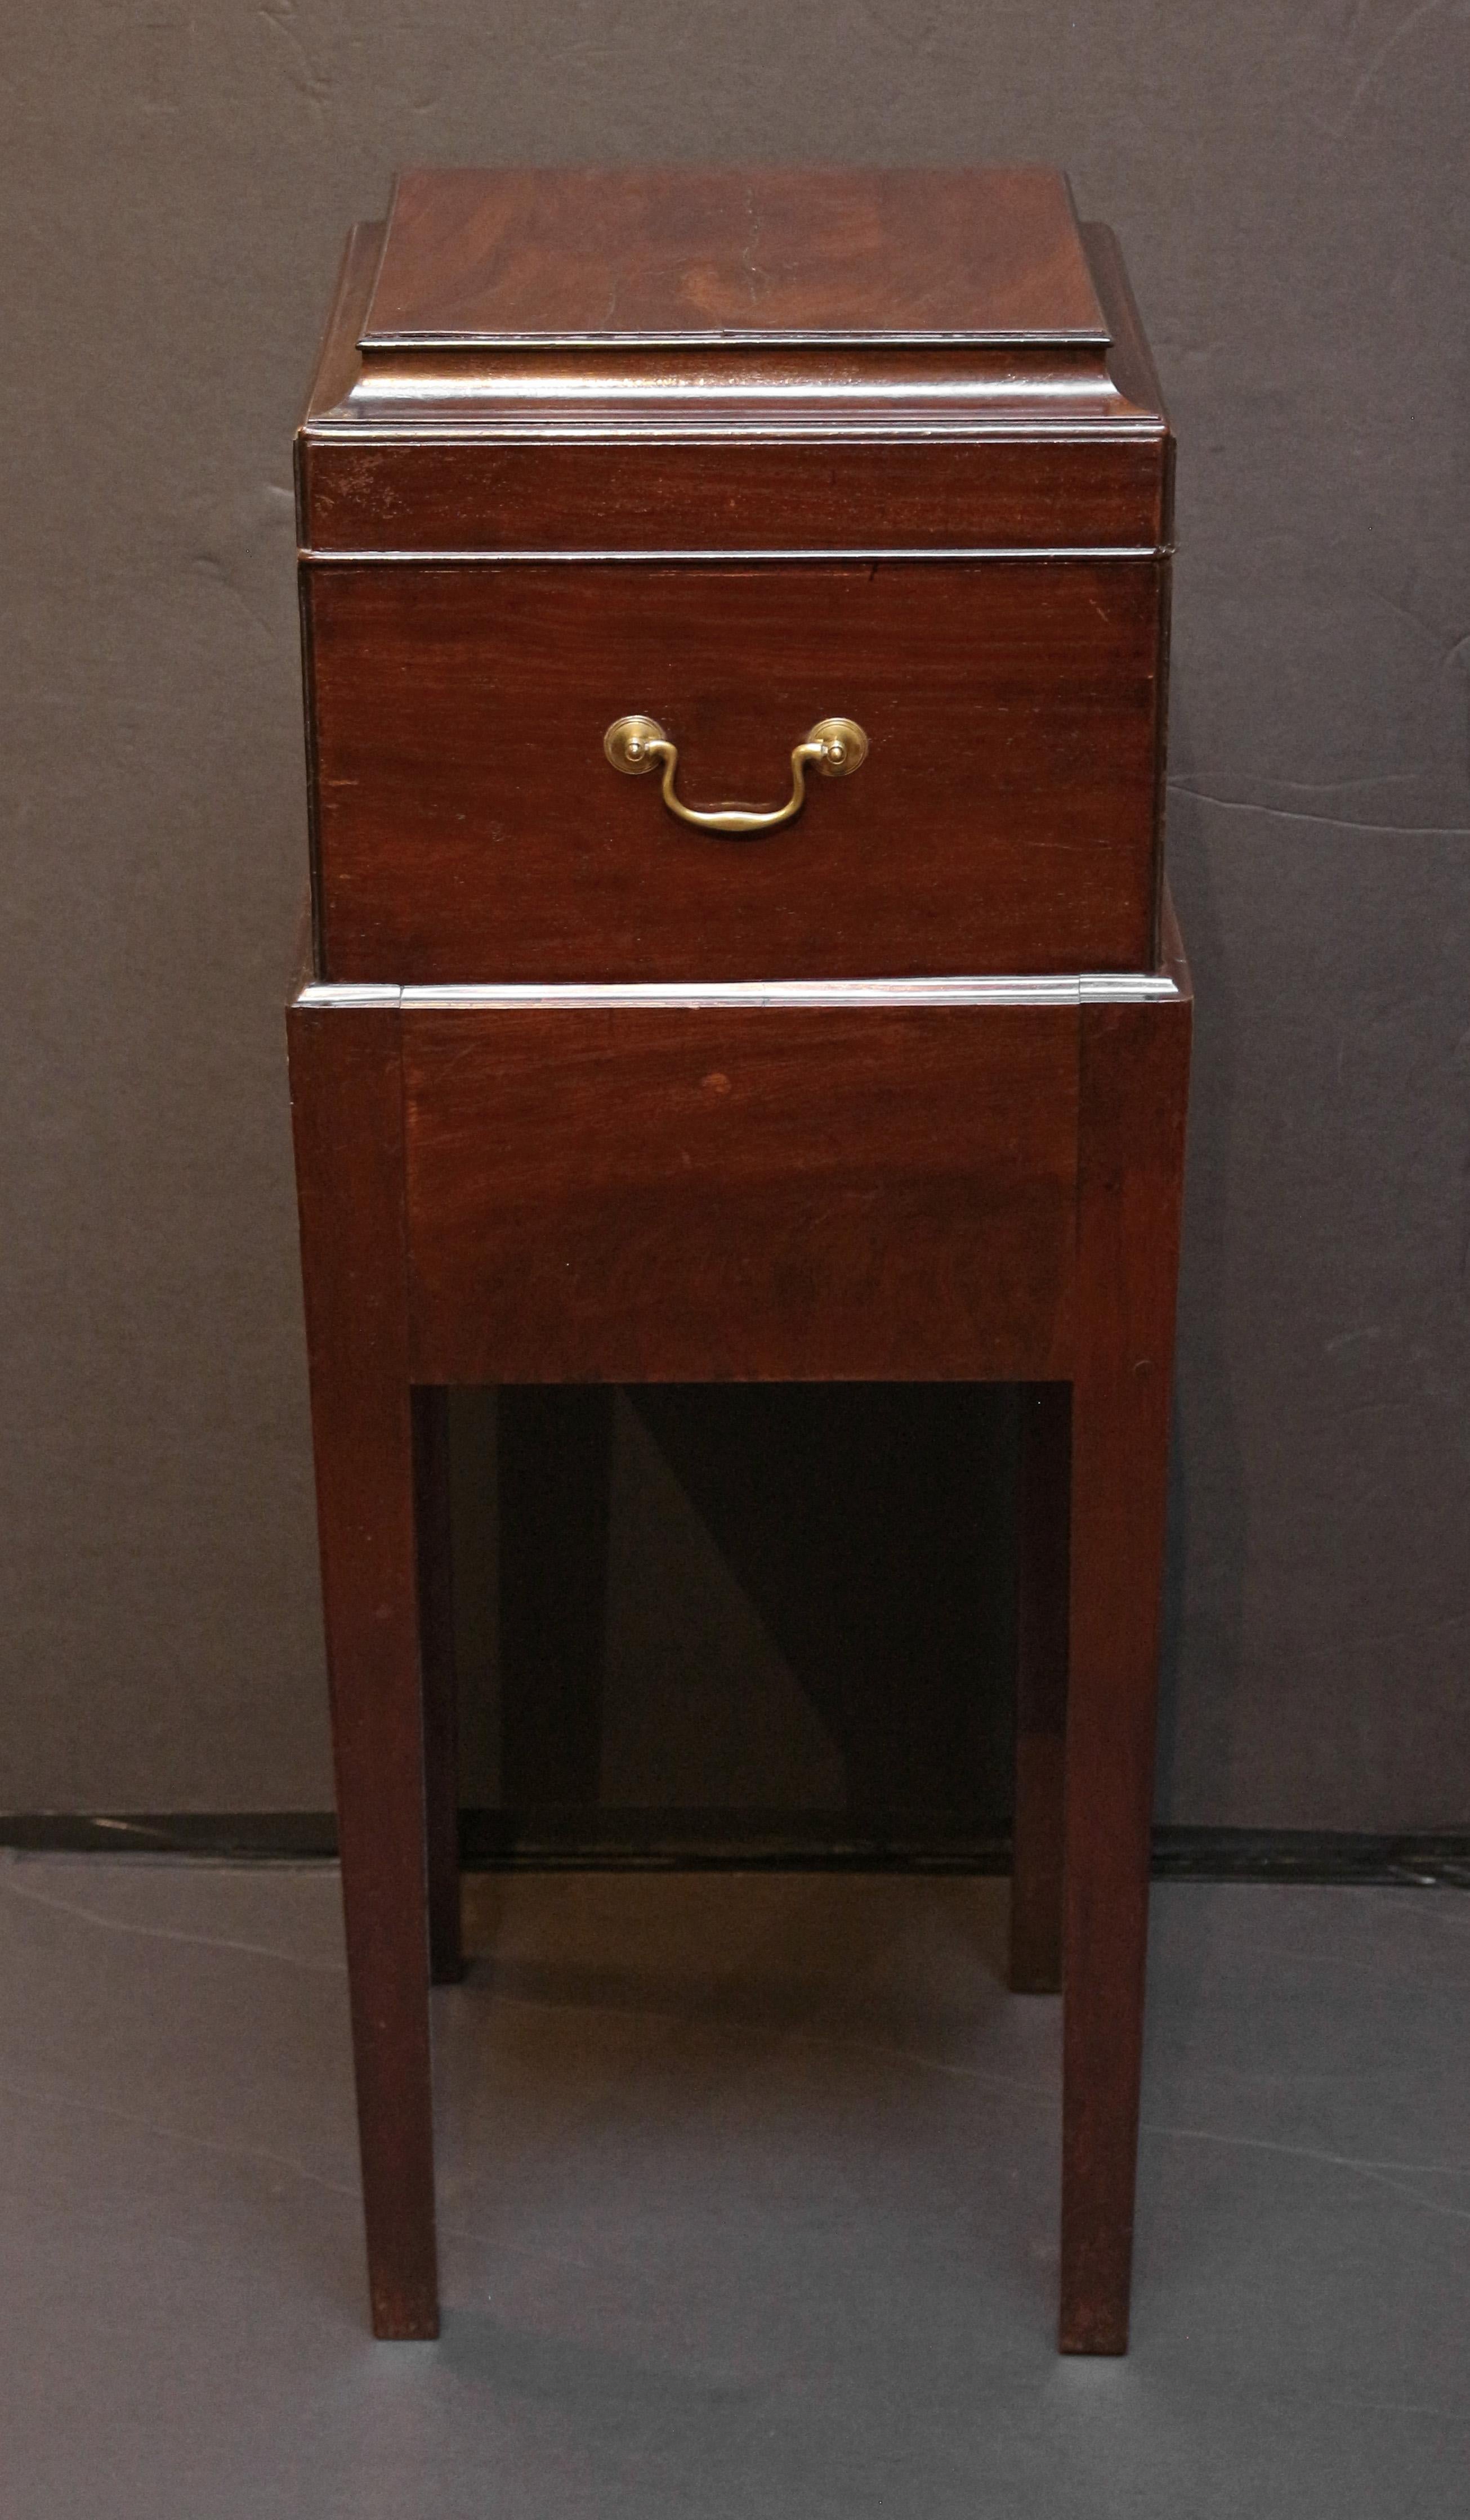 Circa 1780 George III period cellarette on stand, English. Mahogany & mahogany veneered cellarette, the stand with oak secondary wood. Useful drawer in the stand, raised on square, tapered legs. Boxwood escutcheons. Bail & rosette handles. Cove